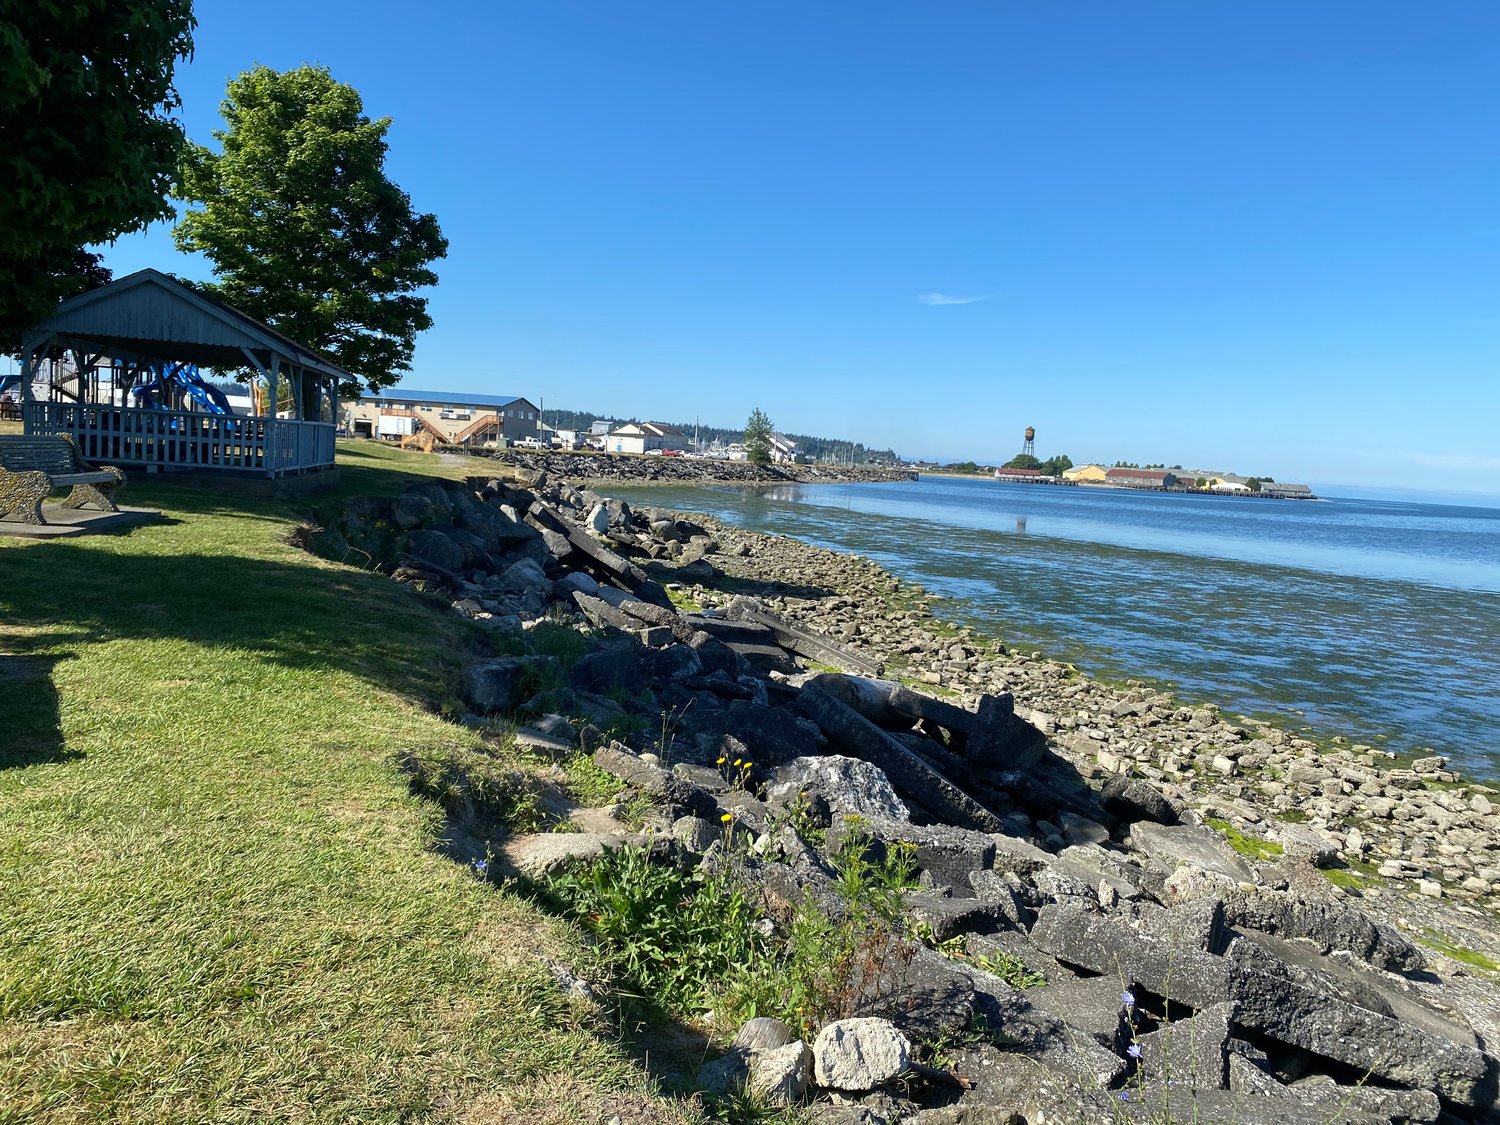 The Blaine Marine Park Shoreline Reconstruction Project will improve about 1,000 feet of shoreline between the playground and Lighthouse Point Water Reclamation Facility.